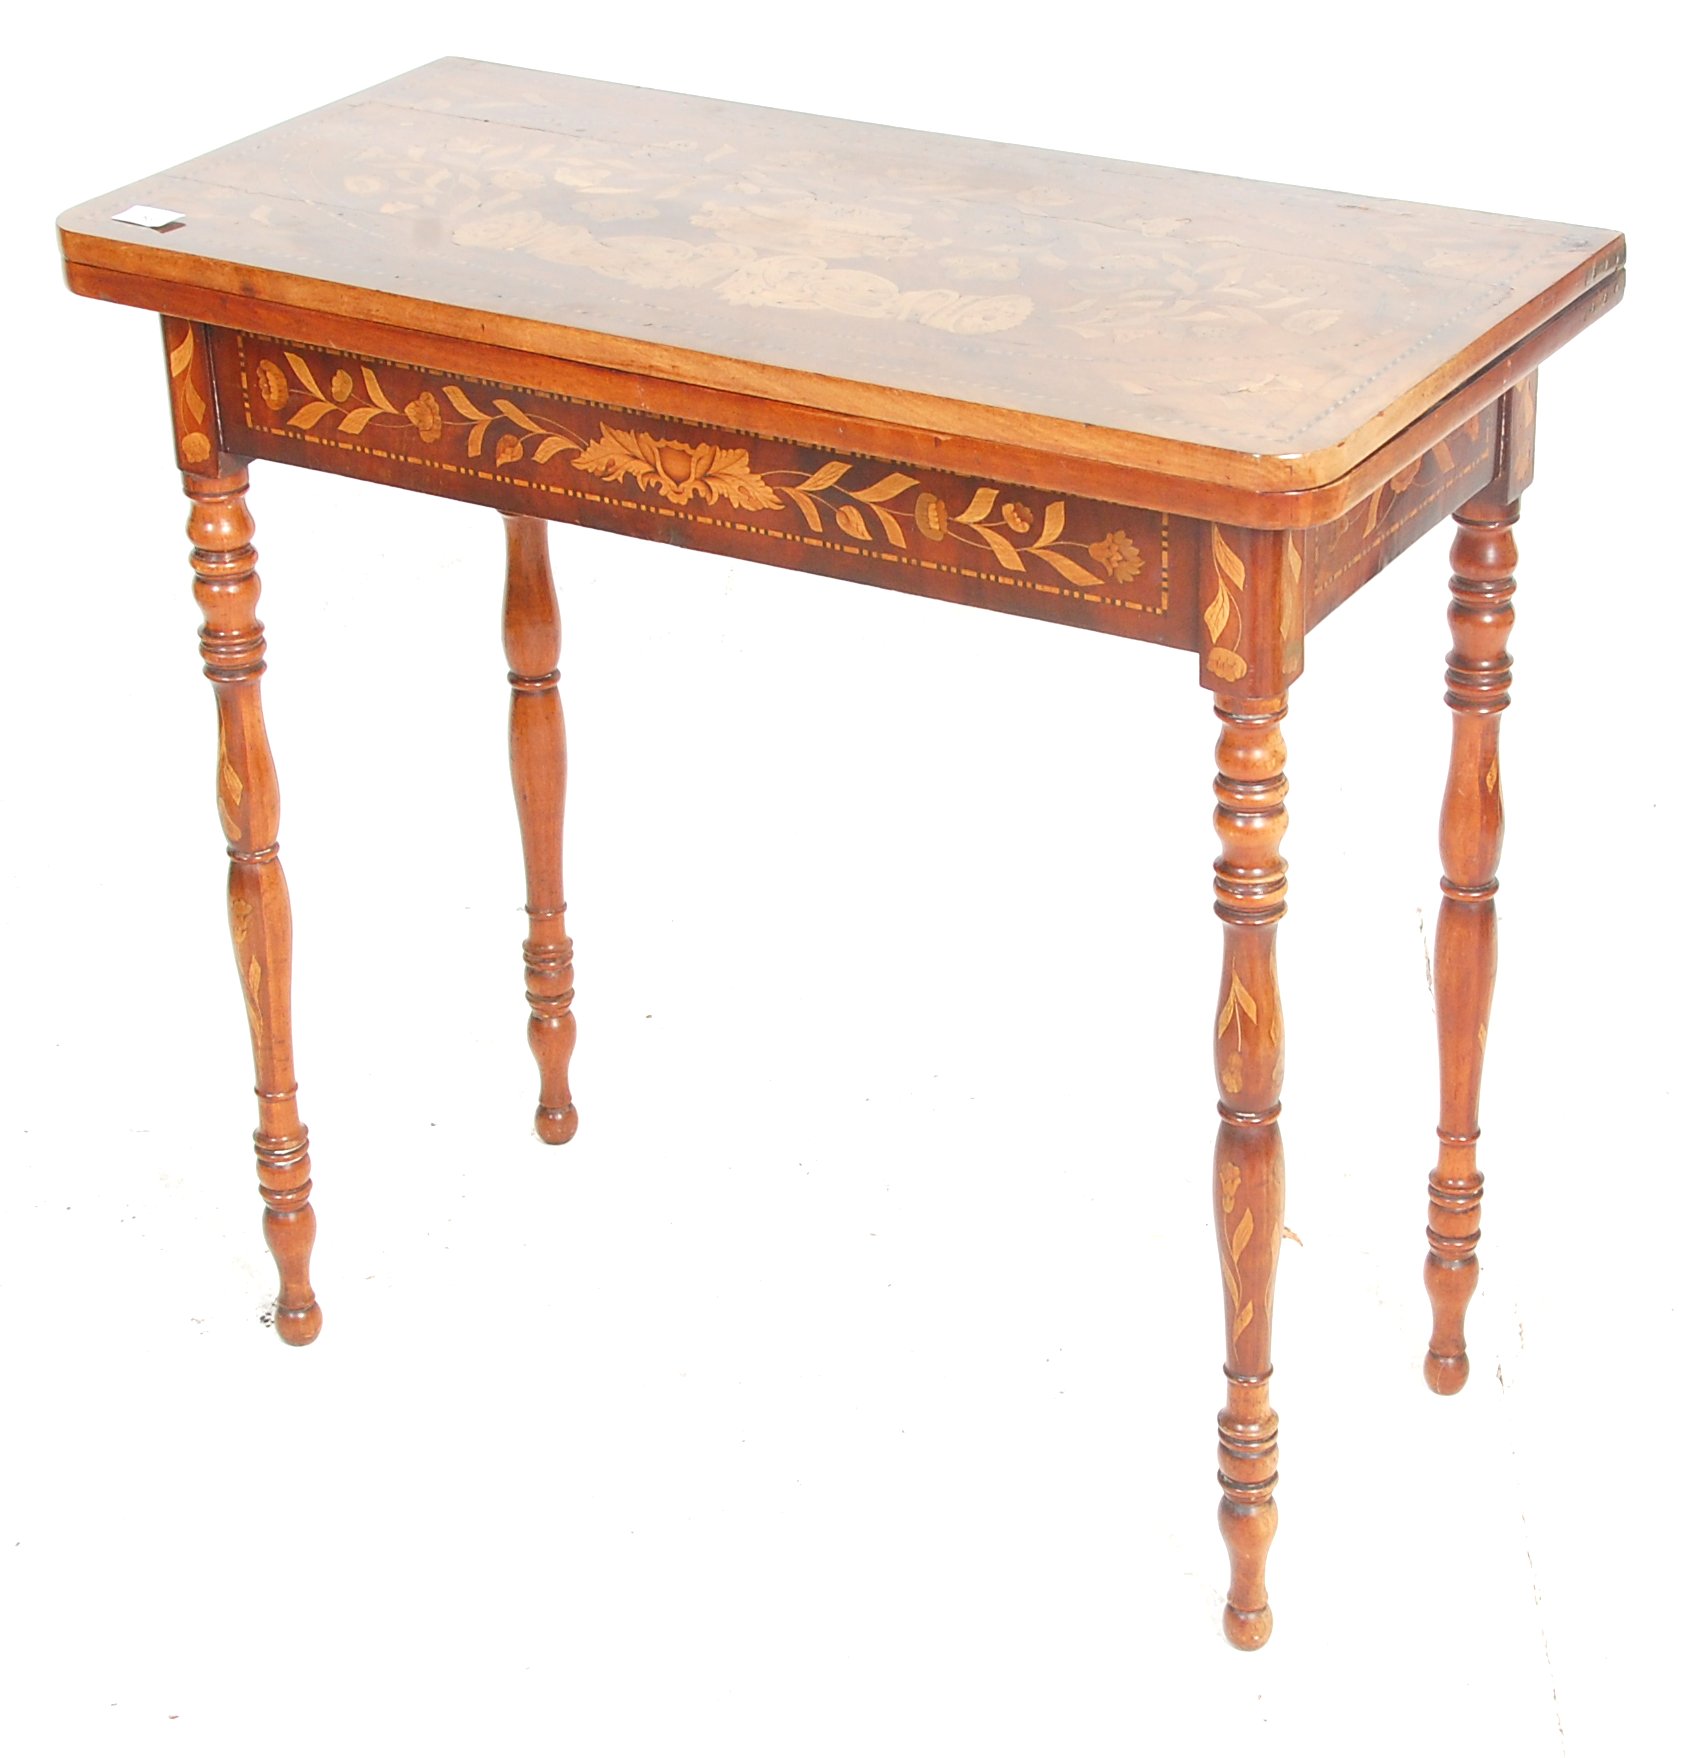 EARLY 19TH CENTURY ANTIQUE WALNUT CARD GAMES TABLE - Image 2 of 6